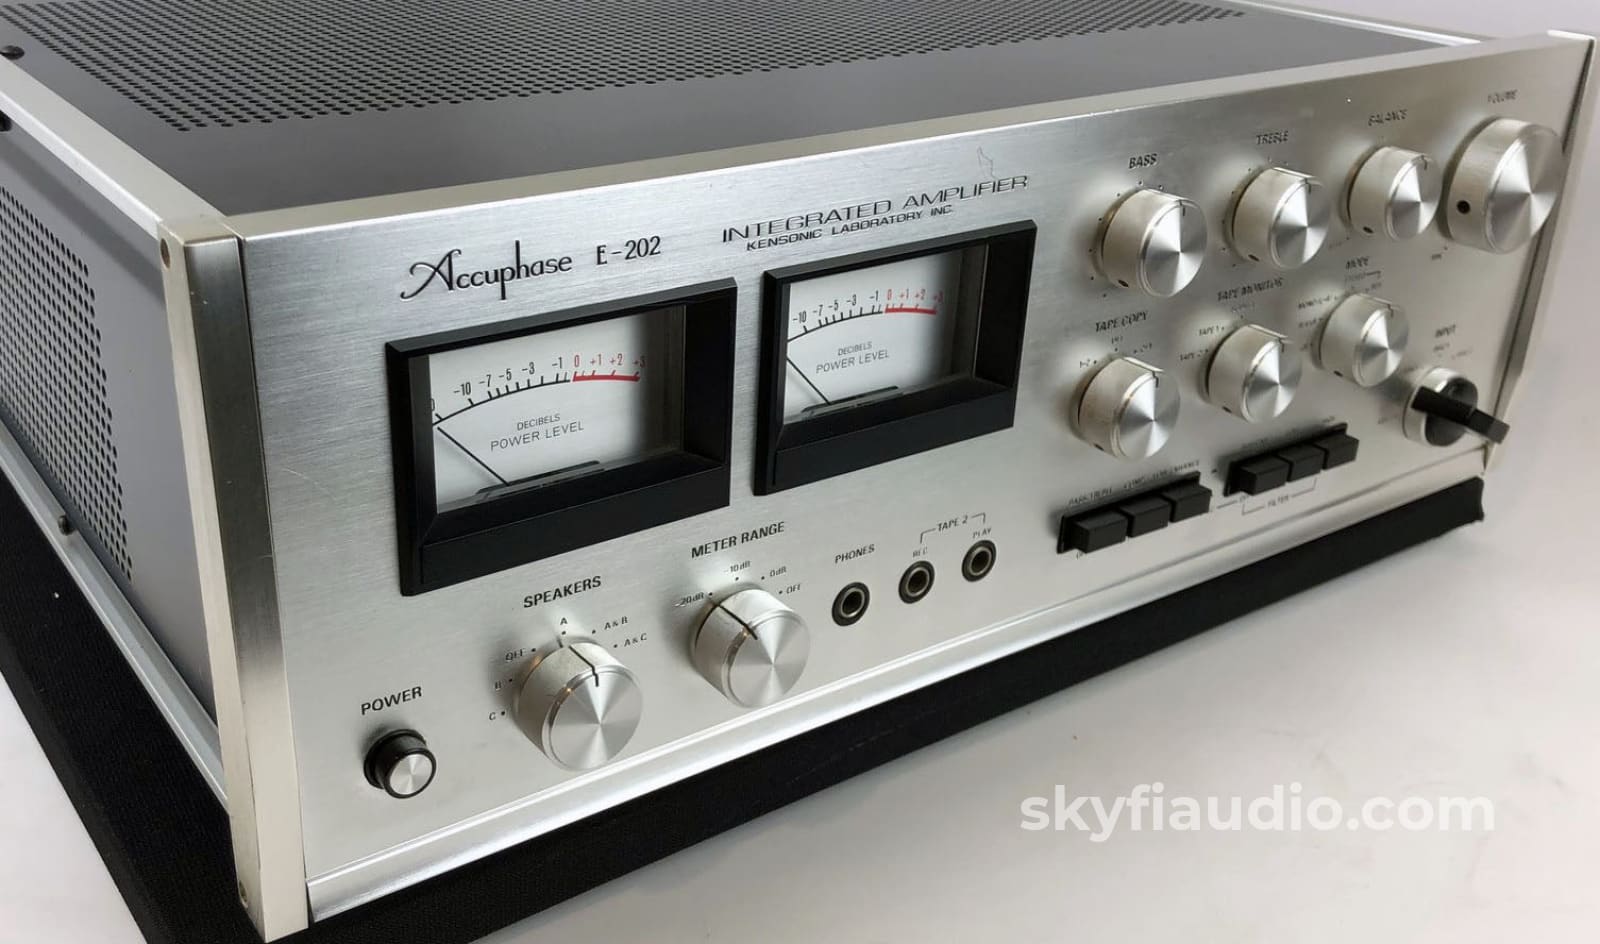 Accuphase E-202 Integrated Amplifier With Meters - Wow!